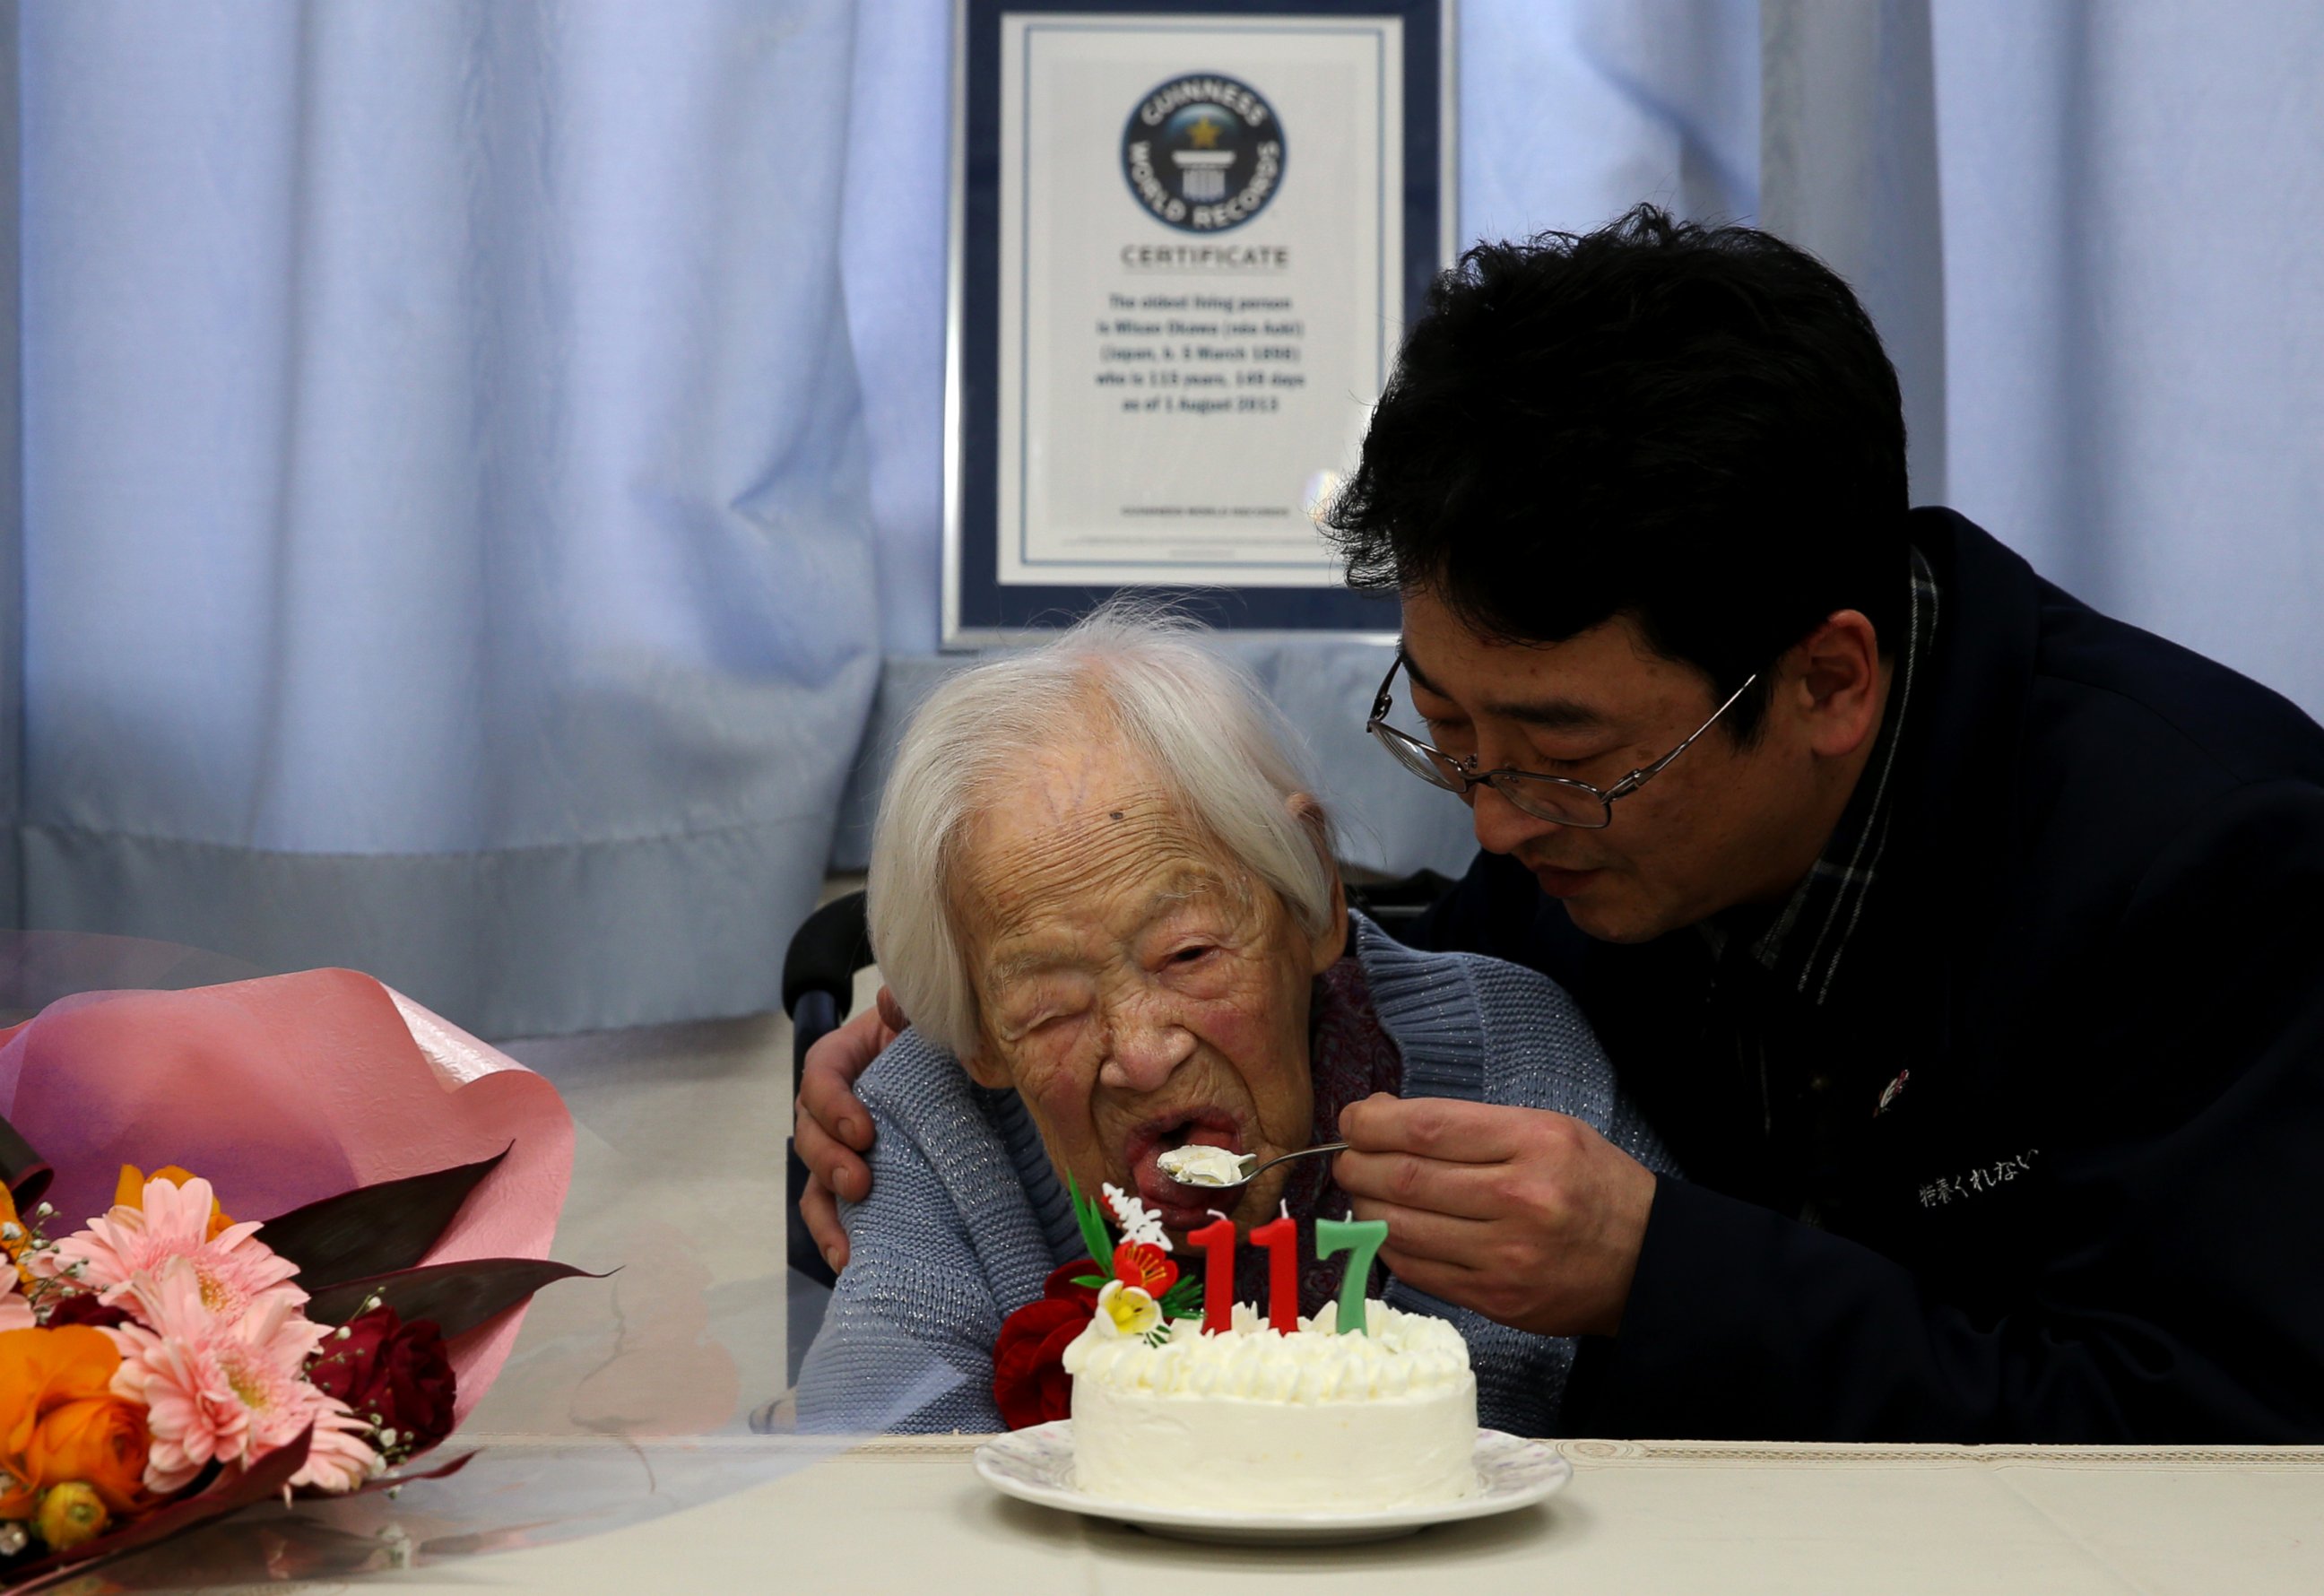 PHOTO: A nursing home employee helps Misao Okawa, who is recognised by Guinness World Records as the world's oldest living person, eat her birthday cake on her 117th birthday celebration at Kurenai Nursing Home on March 5, 2015 in Osaka, Japan.